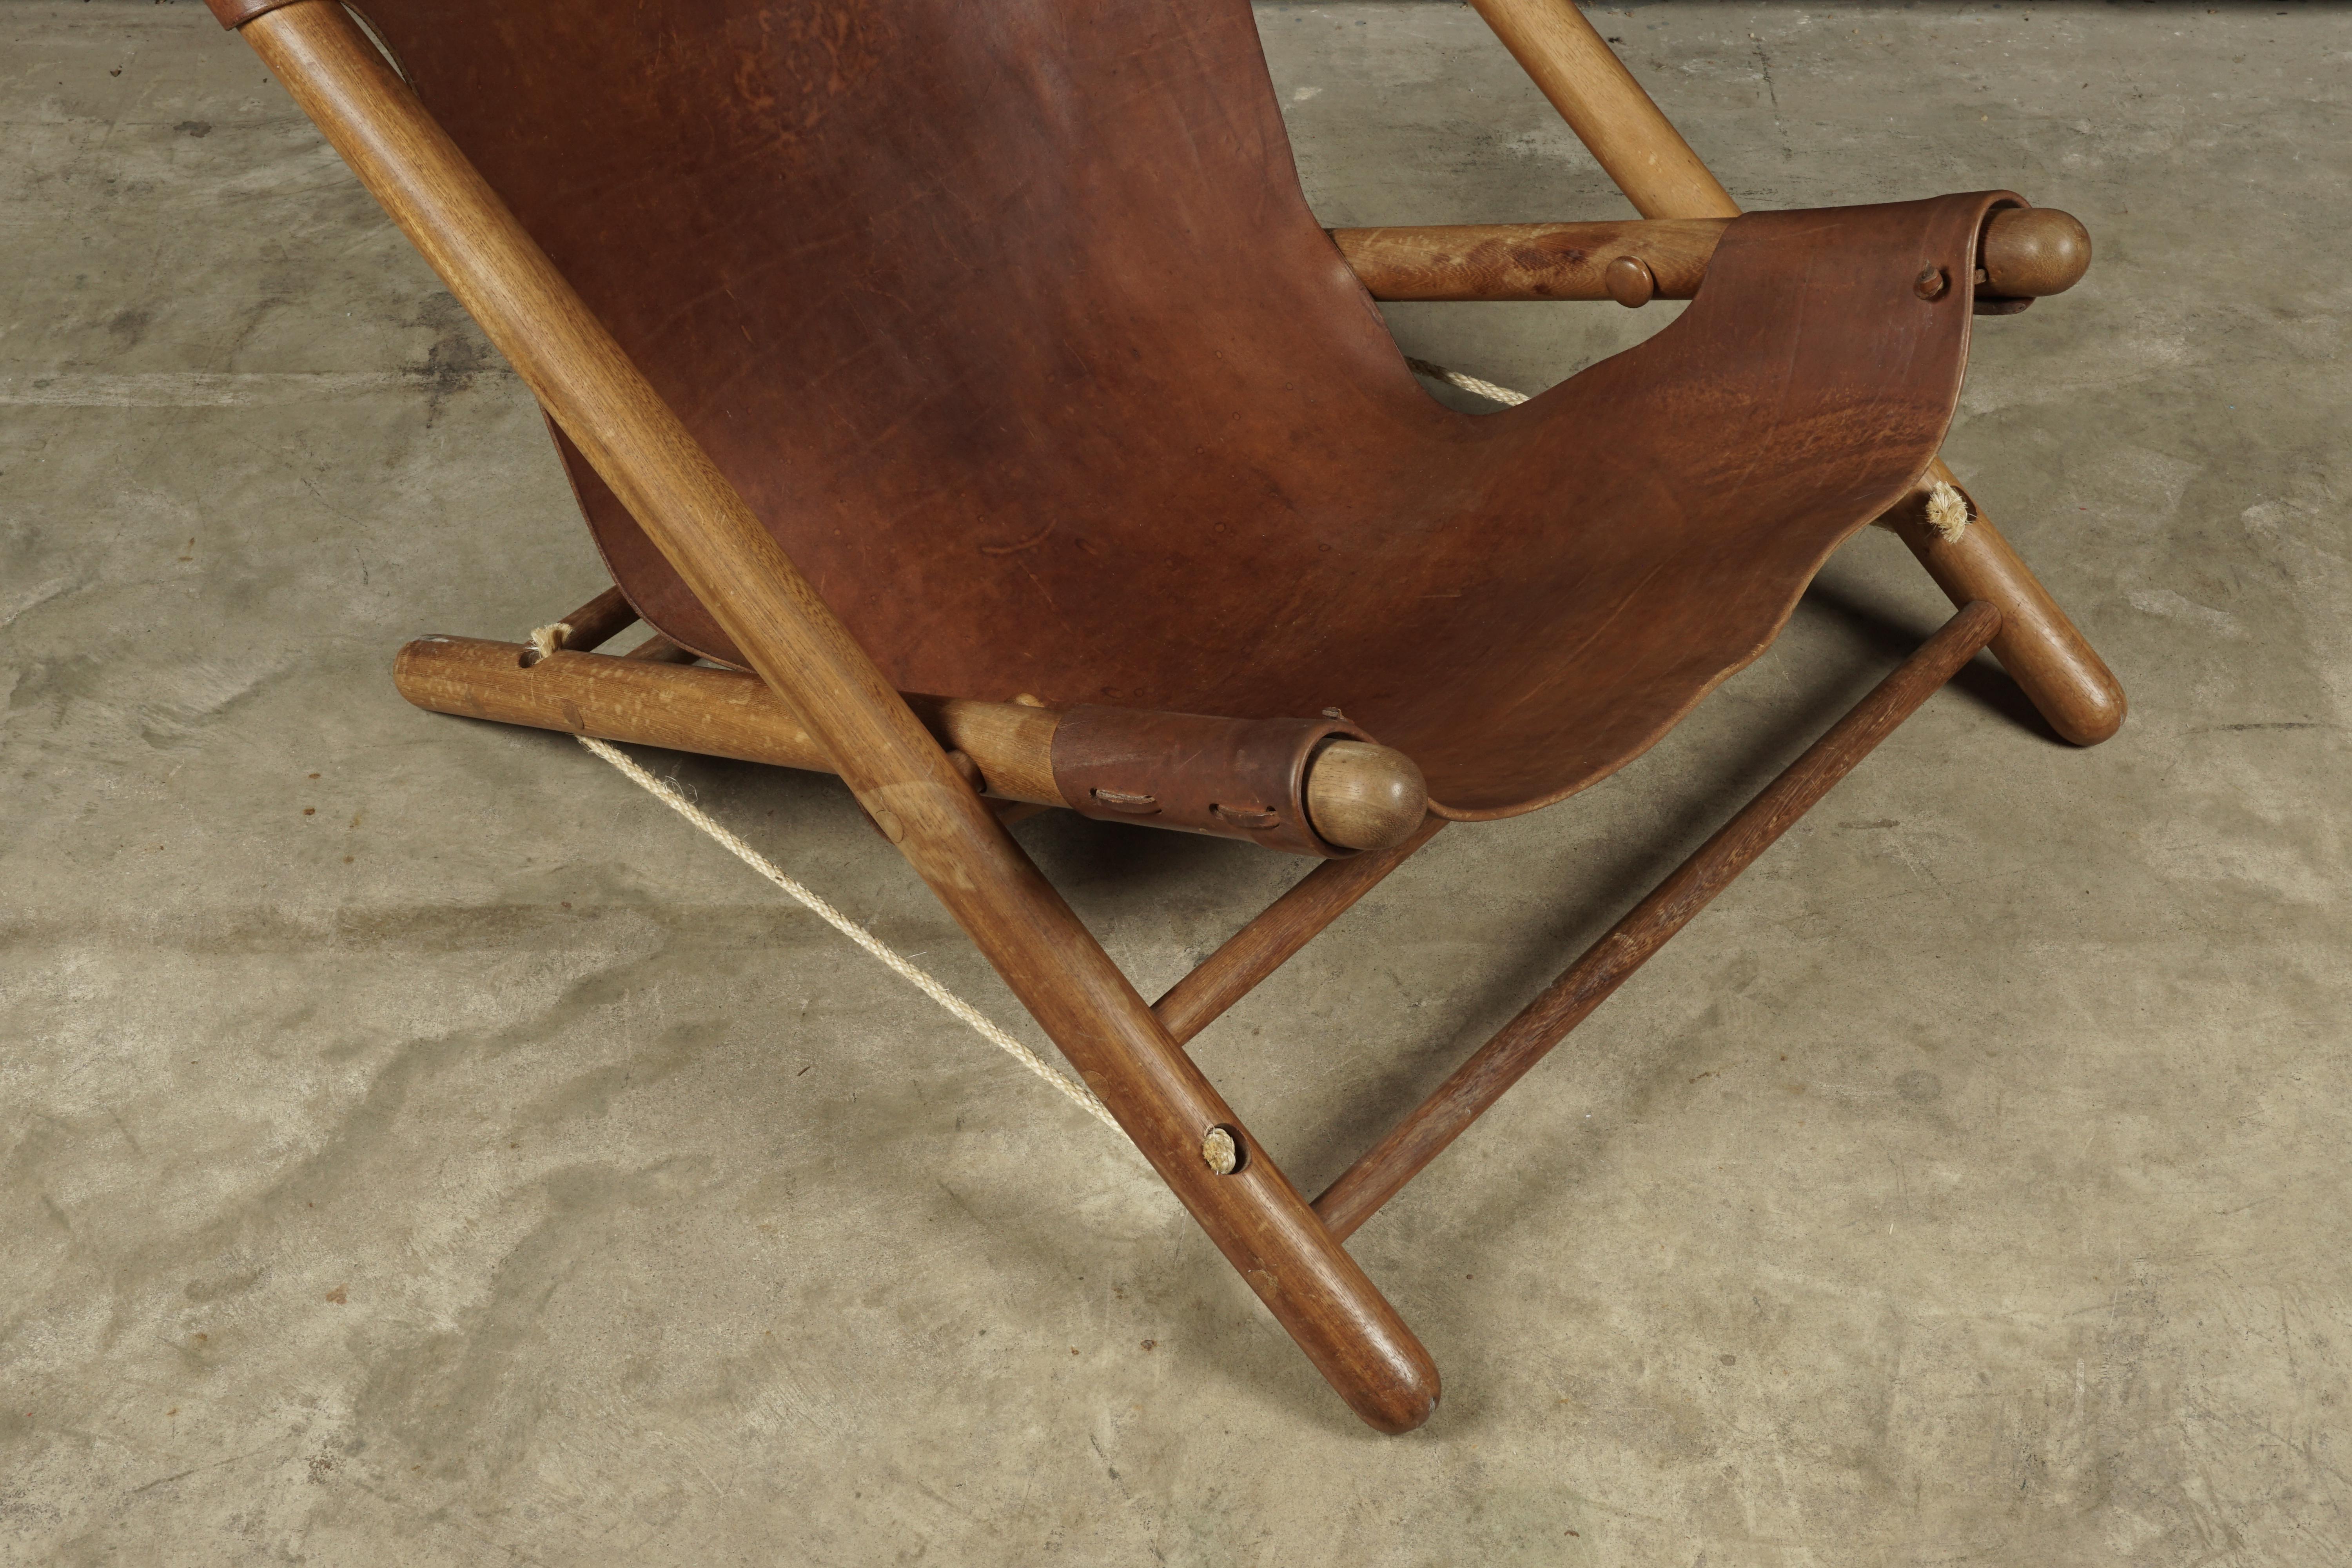 Vintage leather lounge chair from France, circa 1970. Rare foldable model with thick patinated leather. Nice patina and wear.